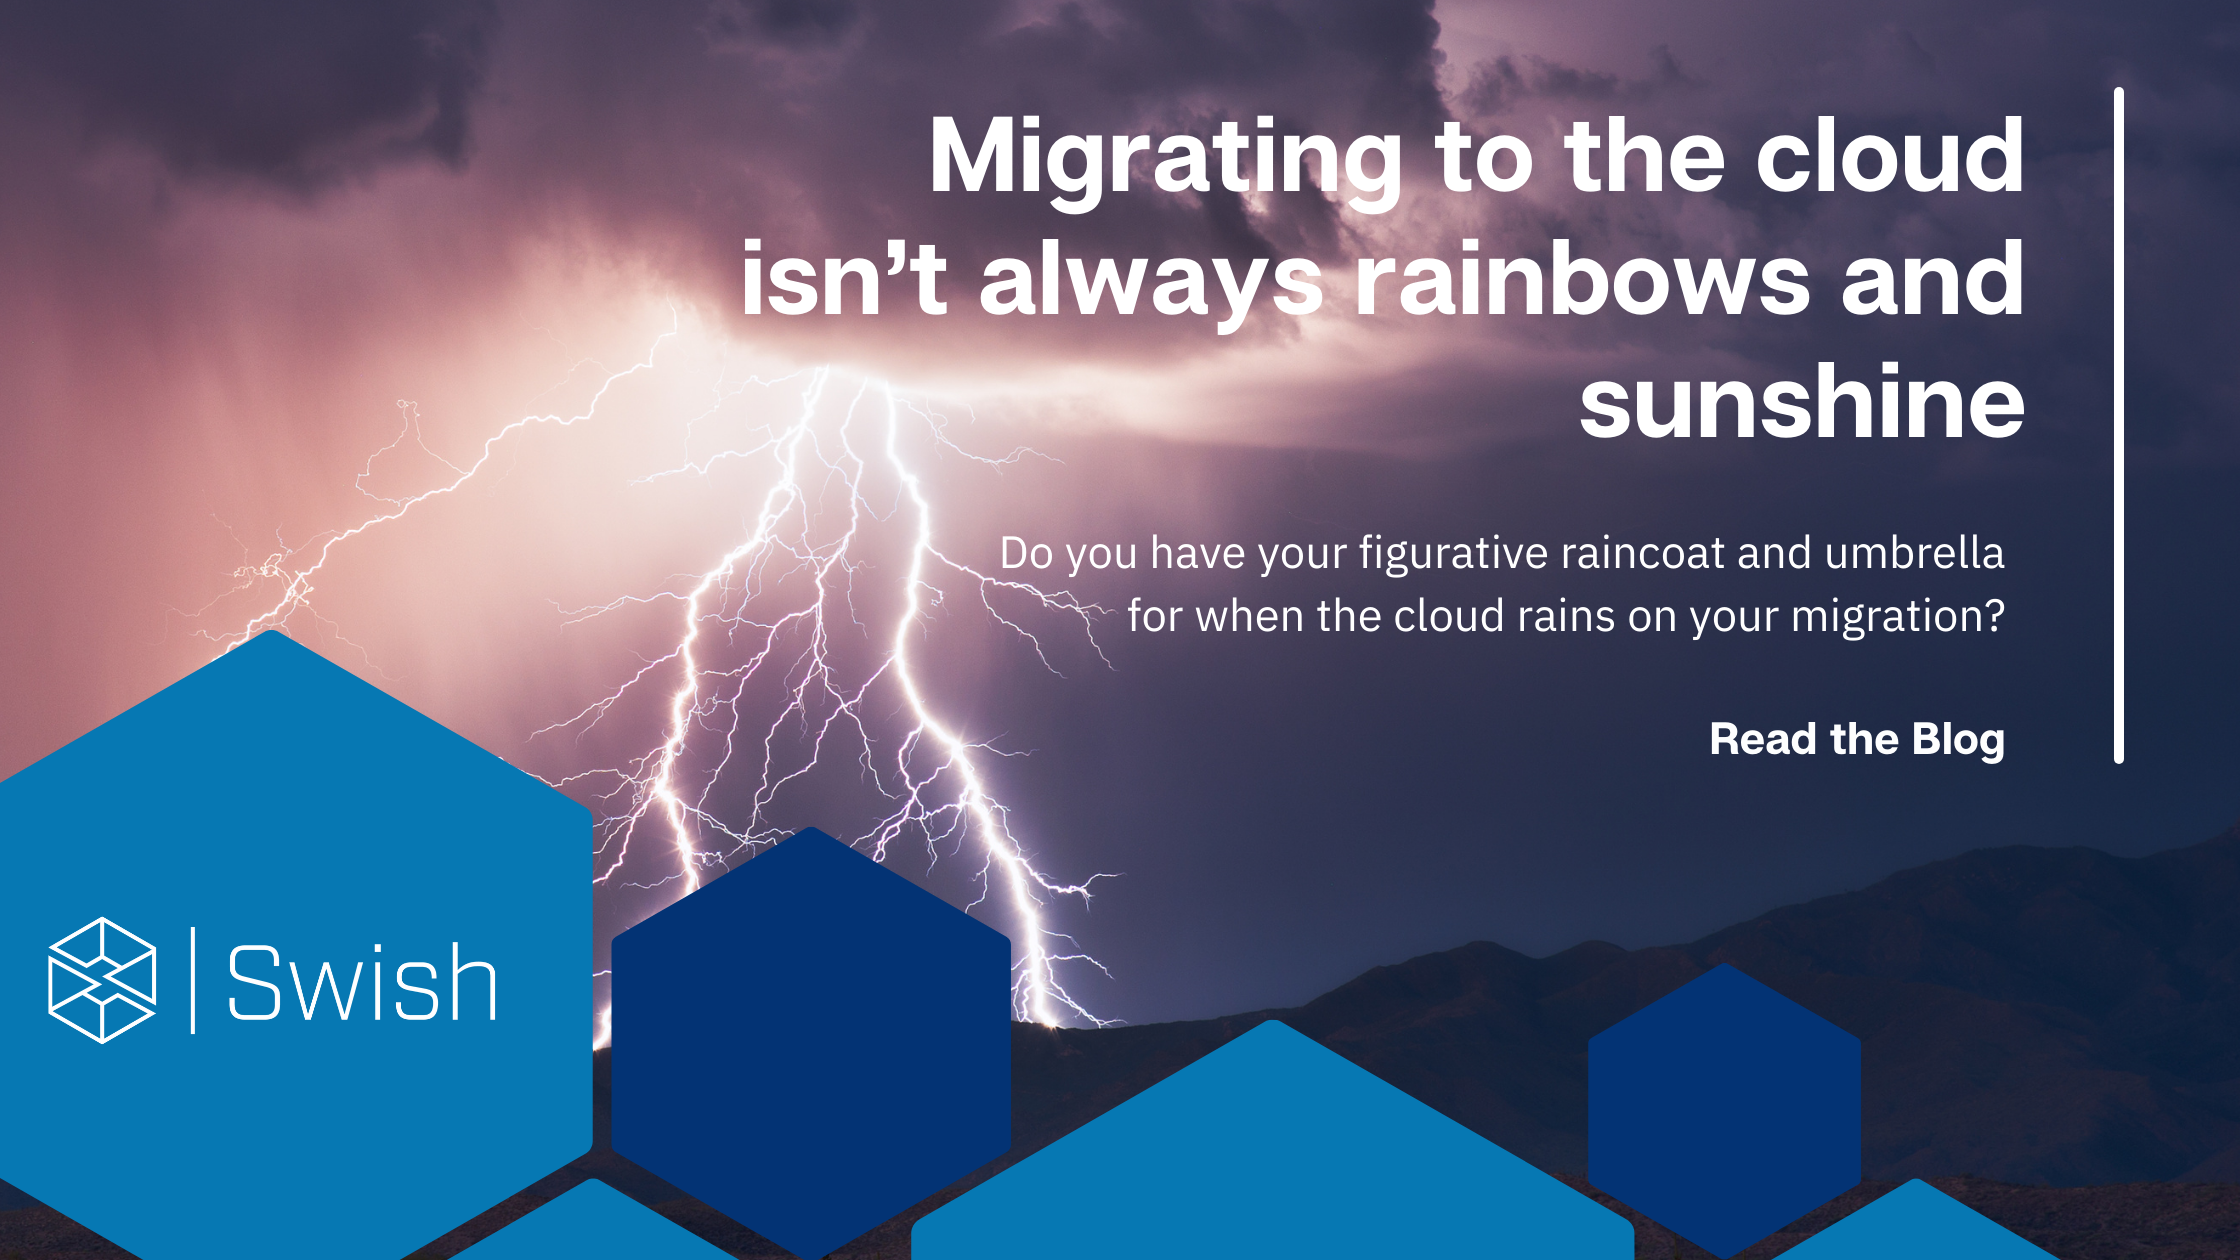 Migrating to the cloud isn't always rainbows and sunshine